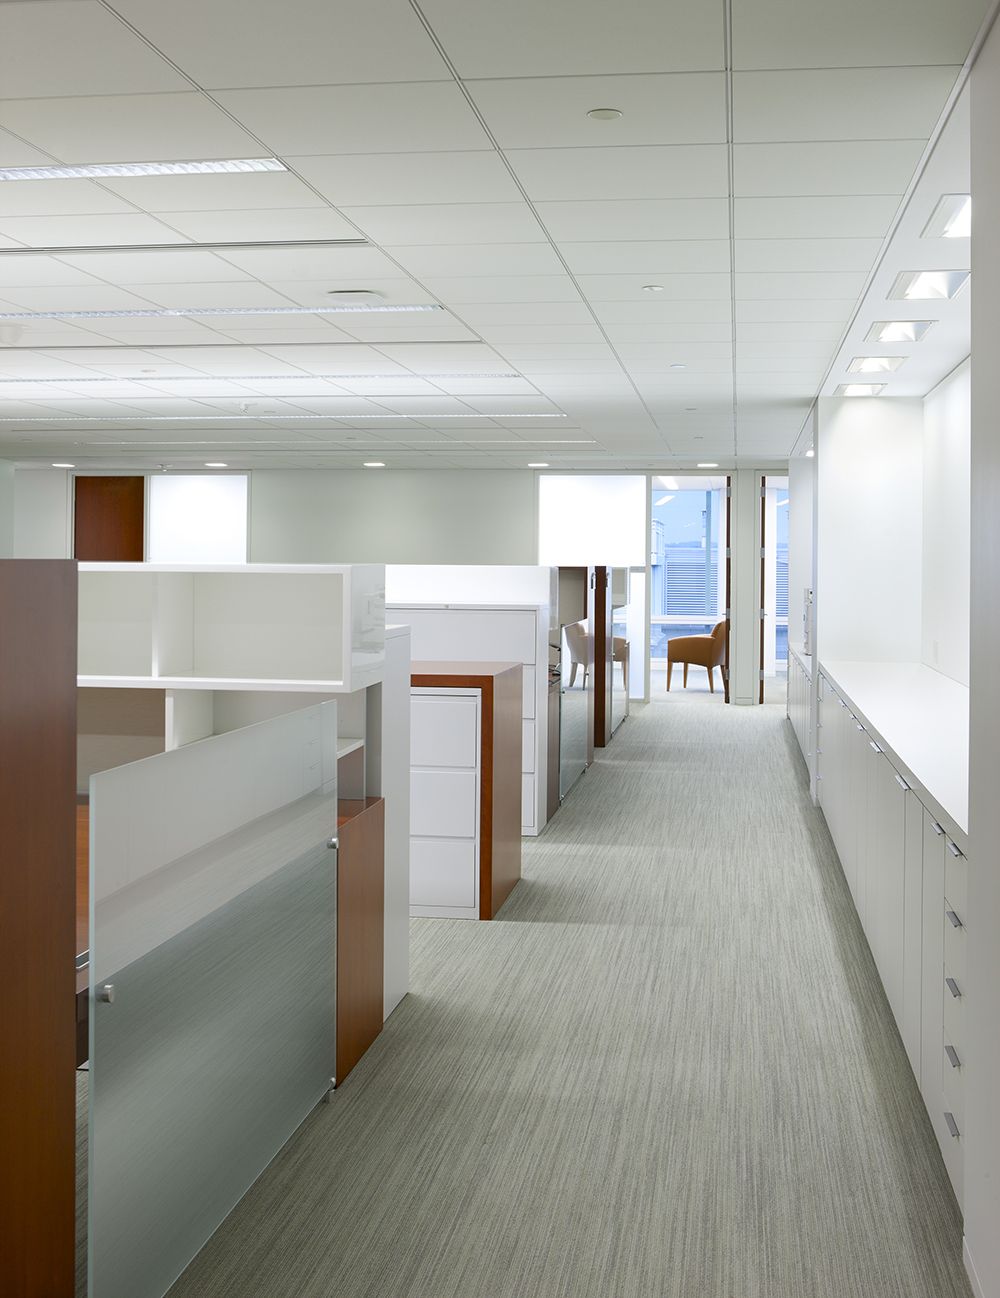 Etched Glass, Brushed Aluminum, and Fabric complement the seamless, compound mitered casework.